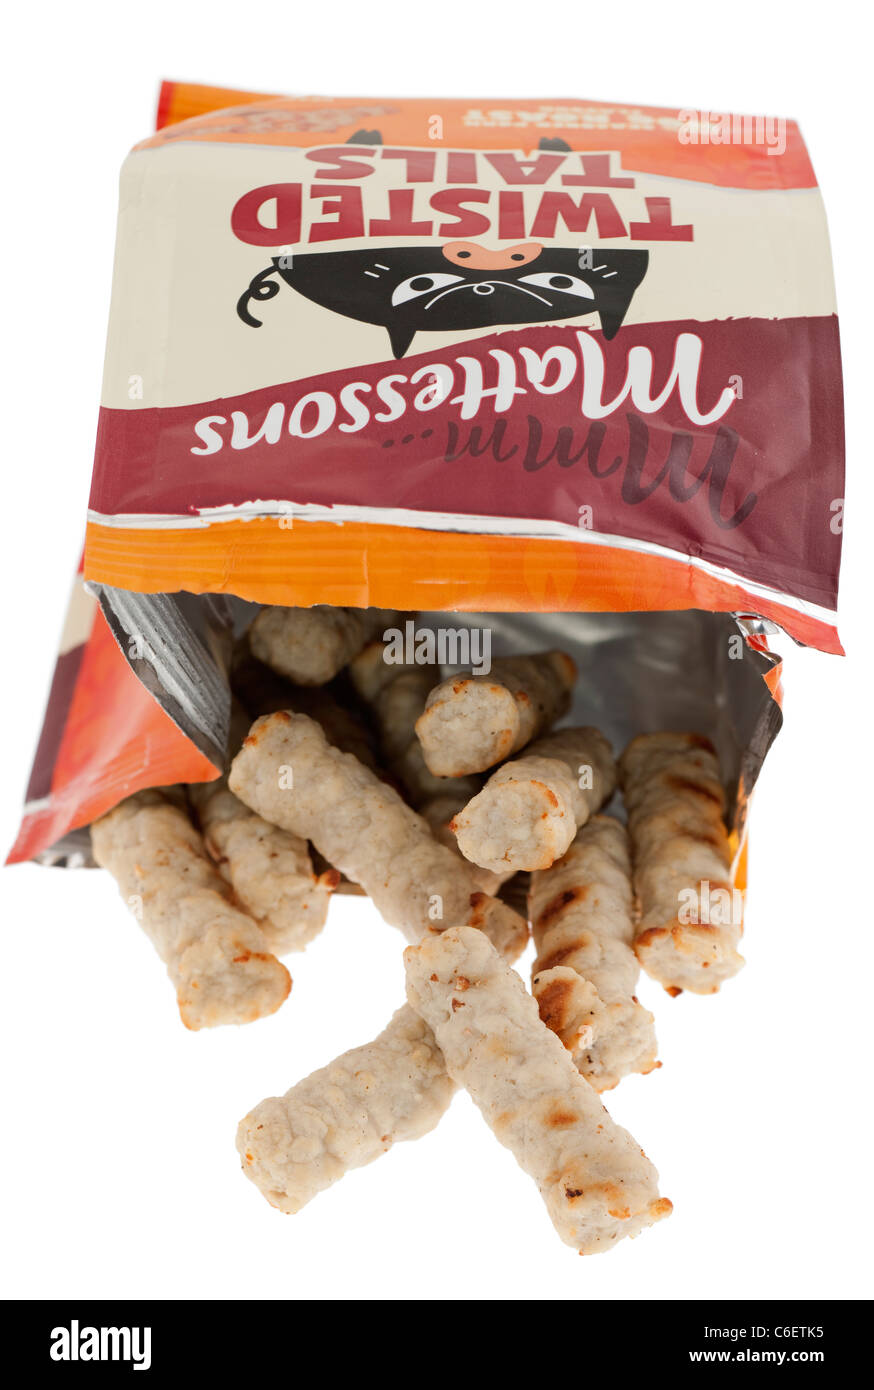 Packet of seasoned pork snacks Mattessons twisted tails Stock Photo